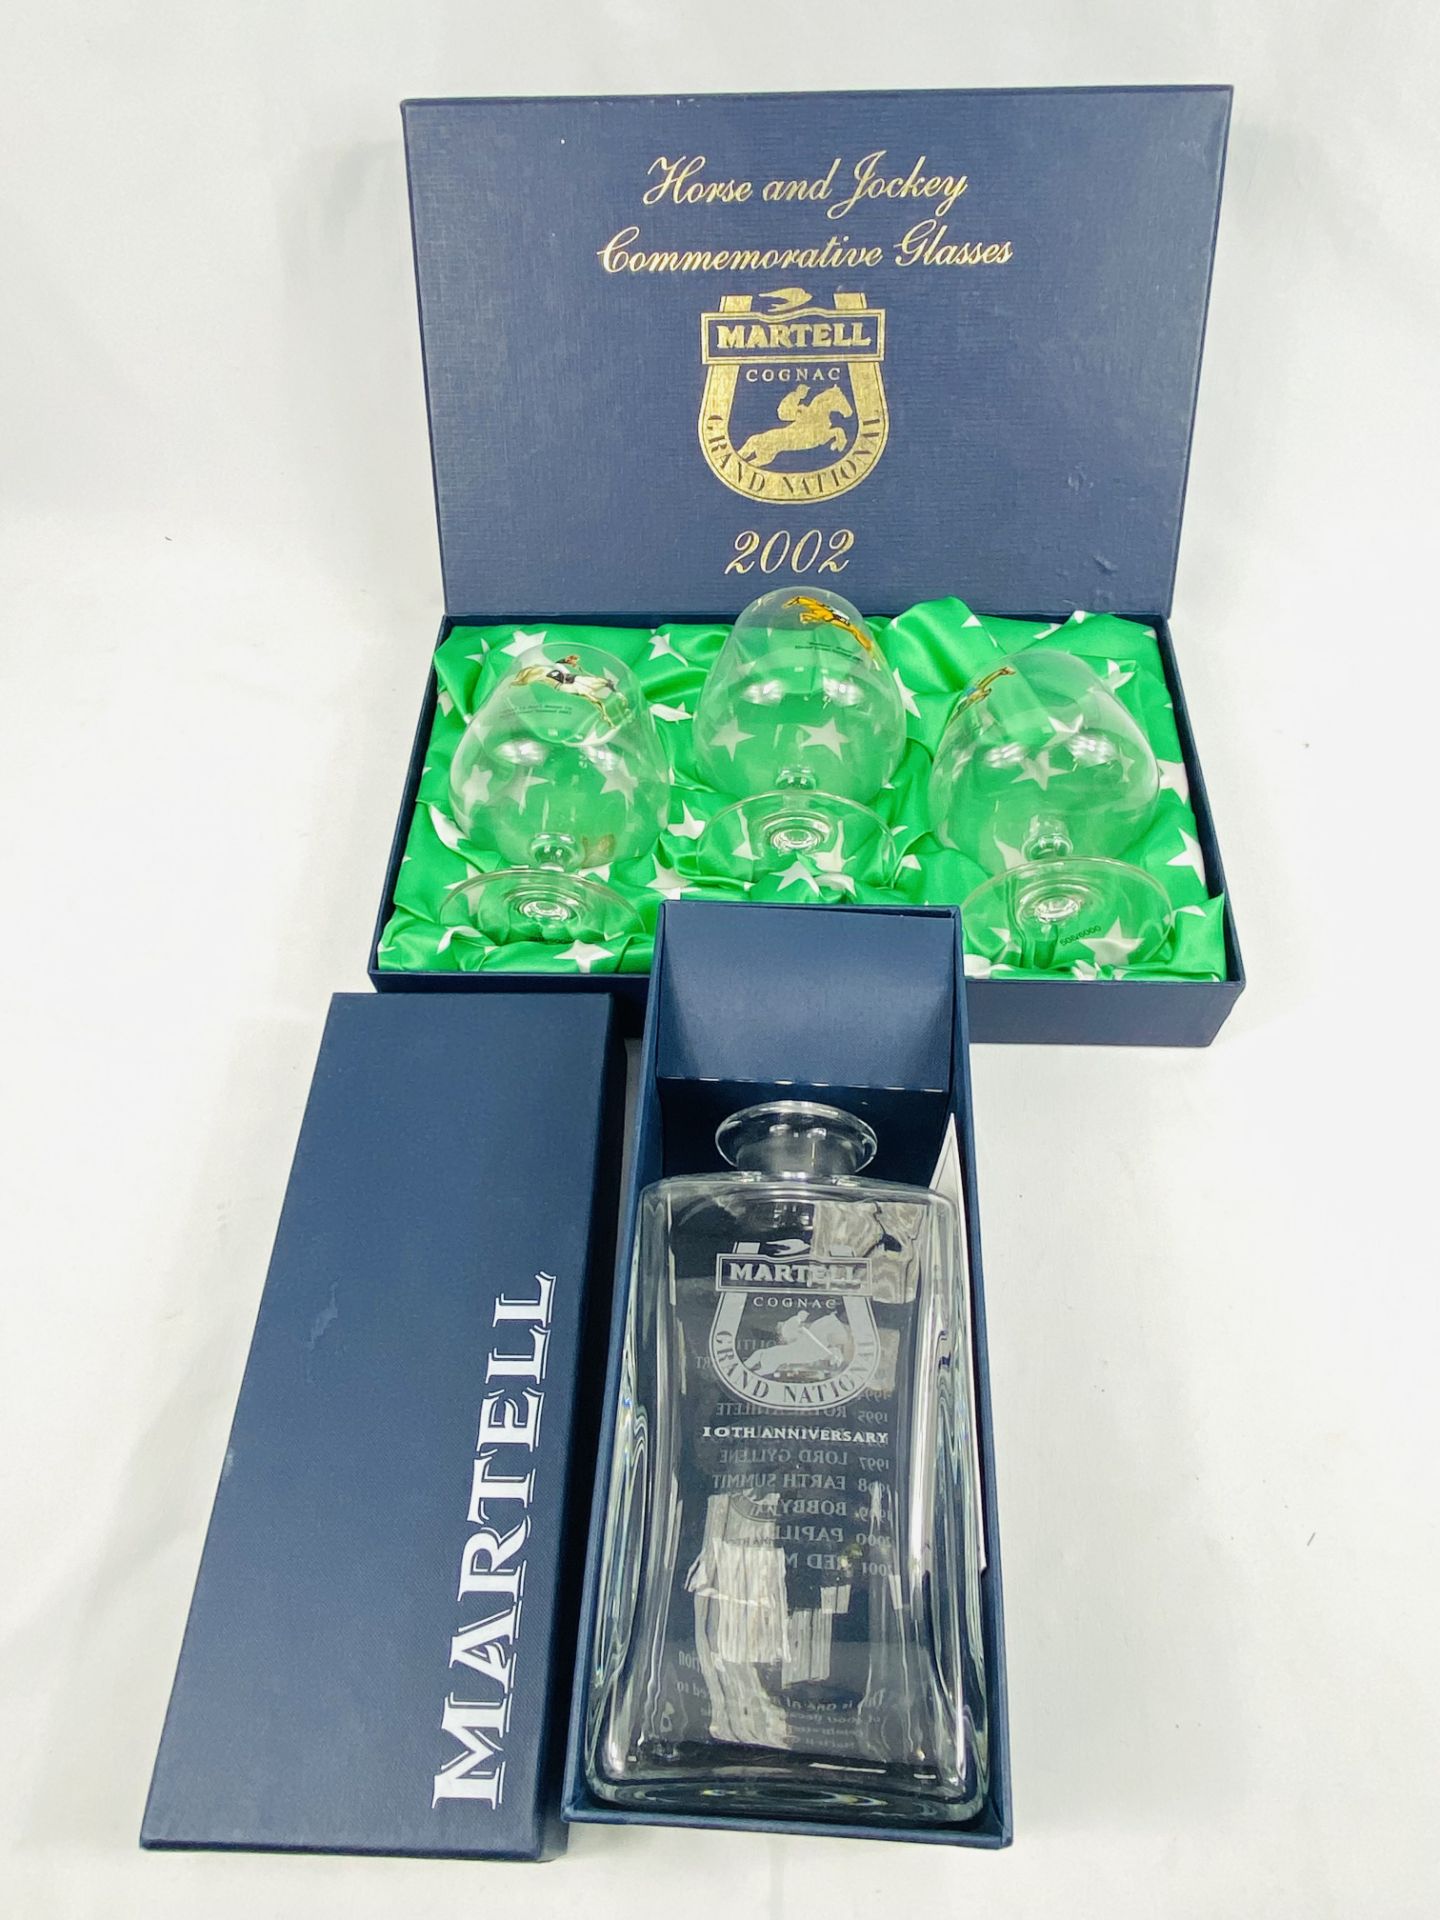 Martell cognac Grand National 10th Anniversary decanter in box